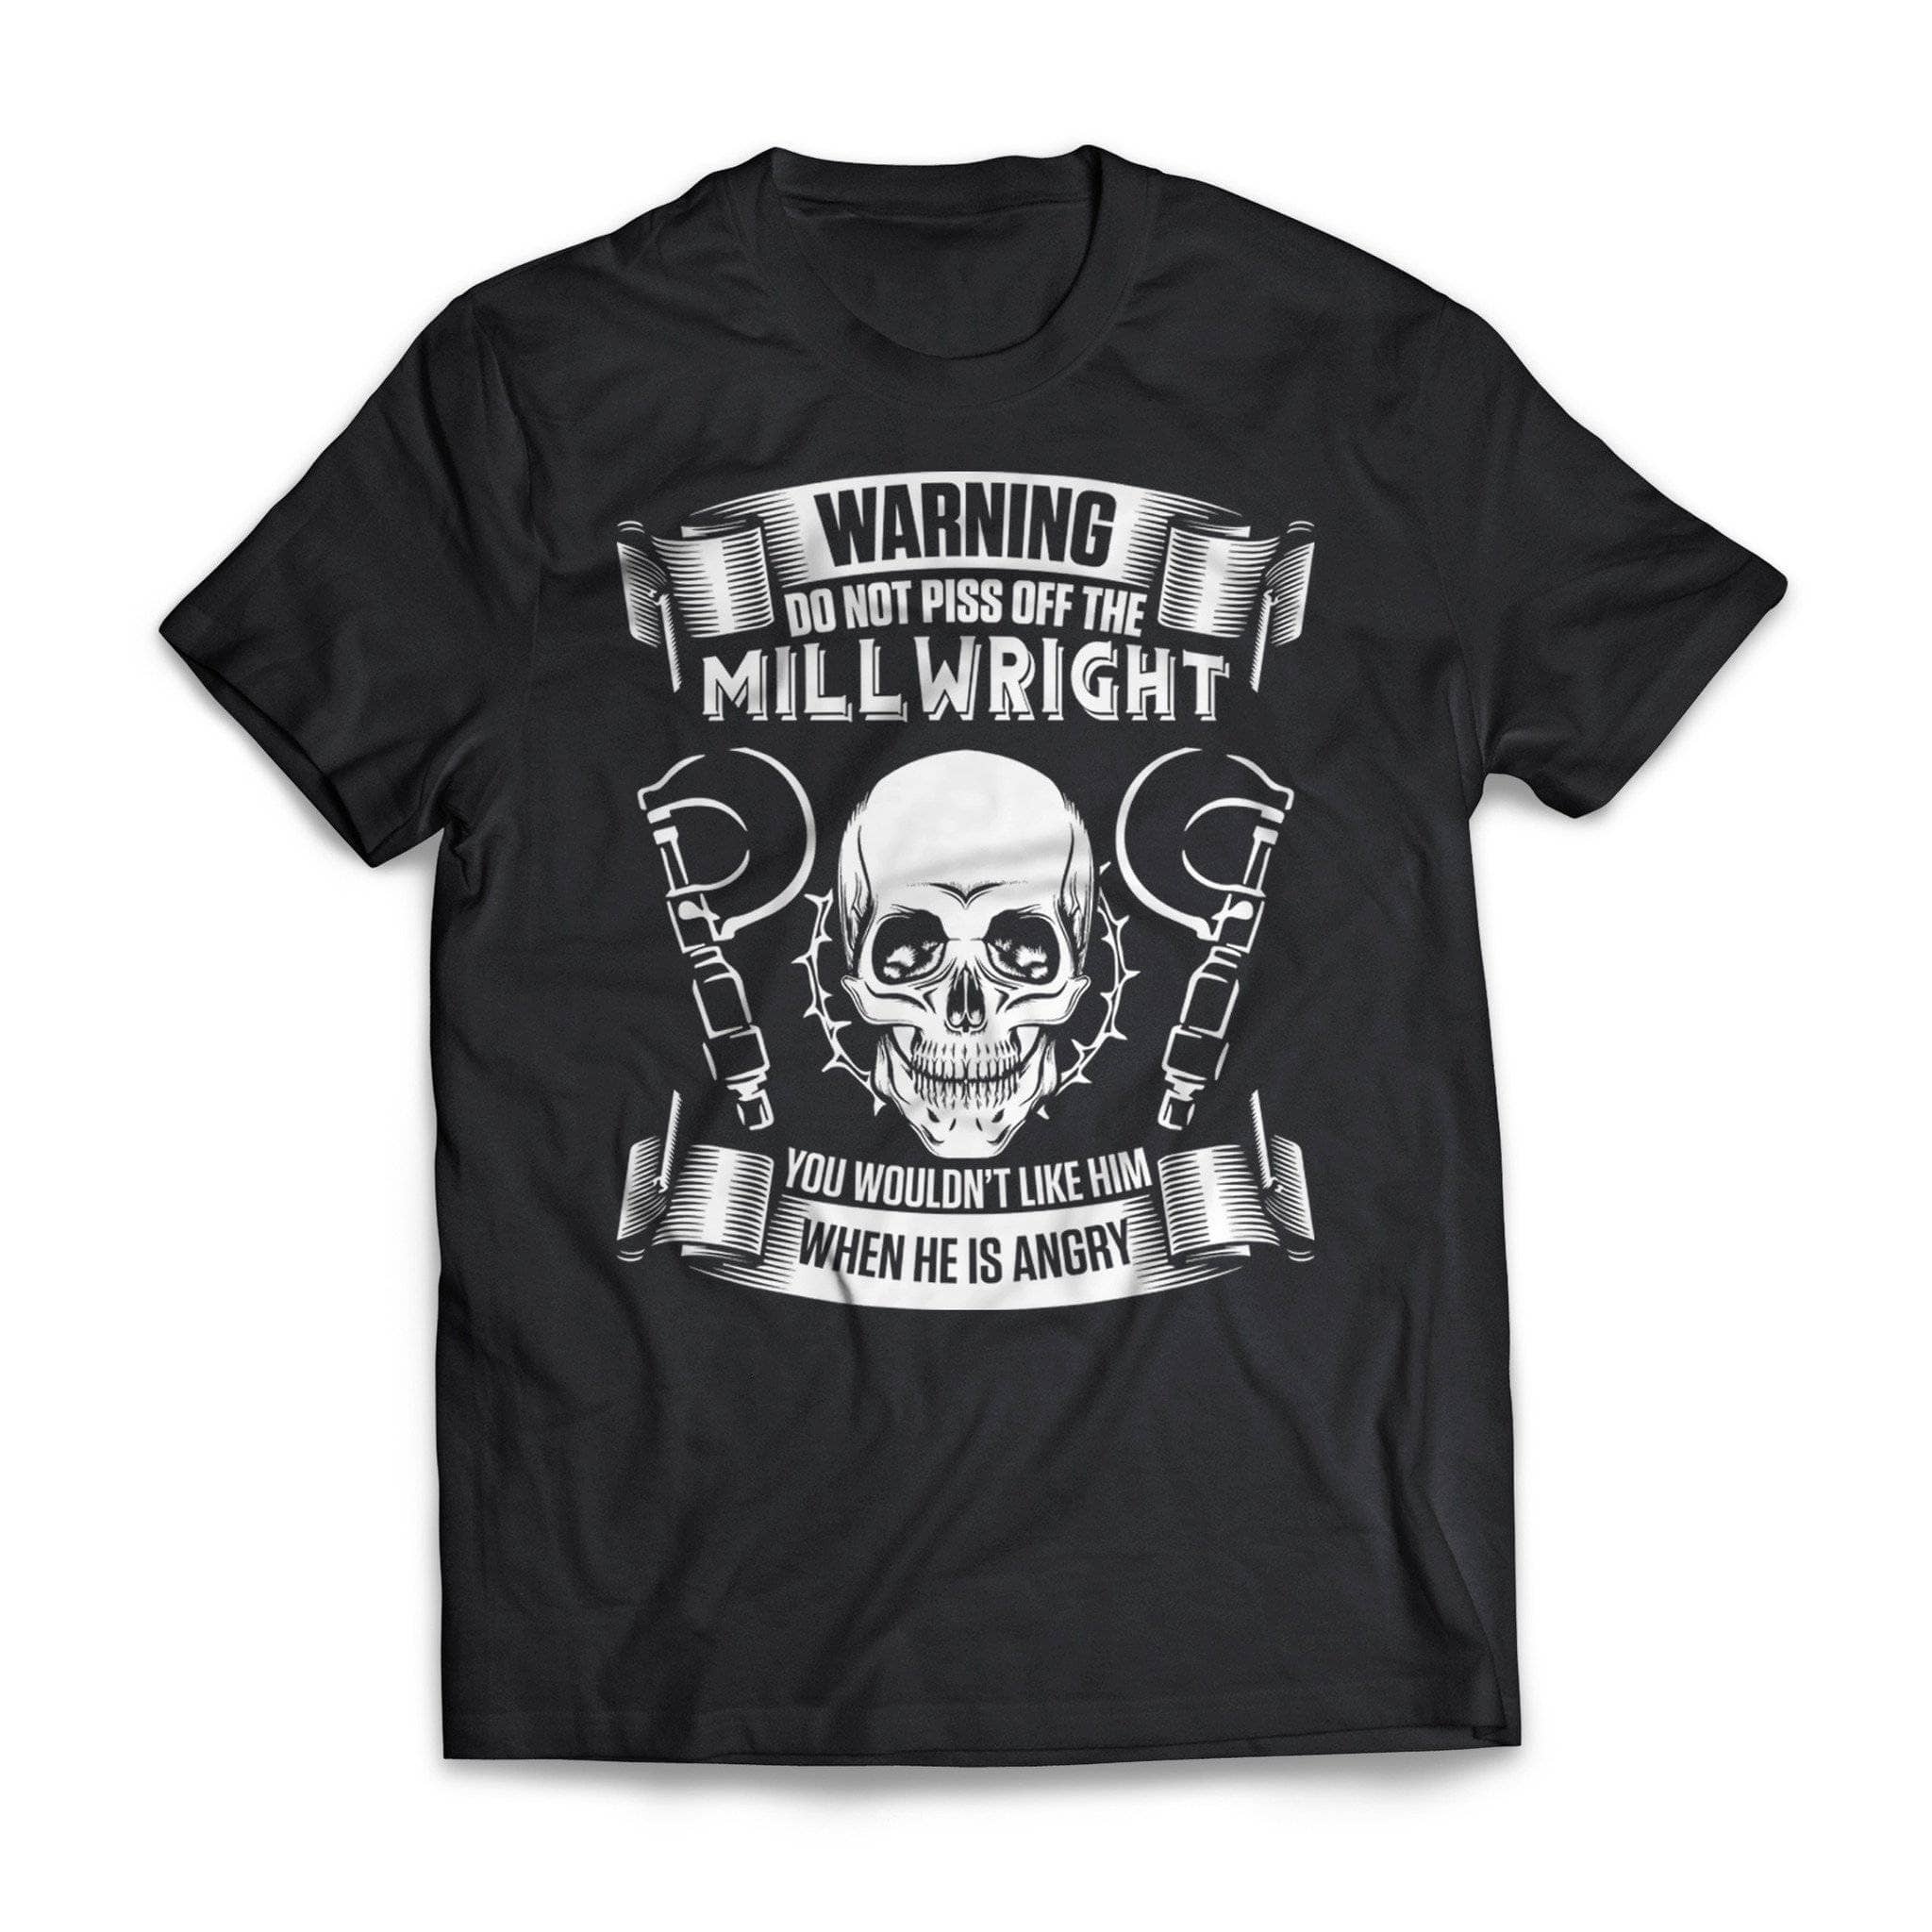 Don't Piss Off Millwright Short Sleeve Tee